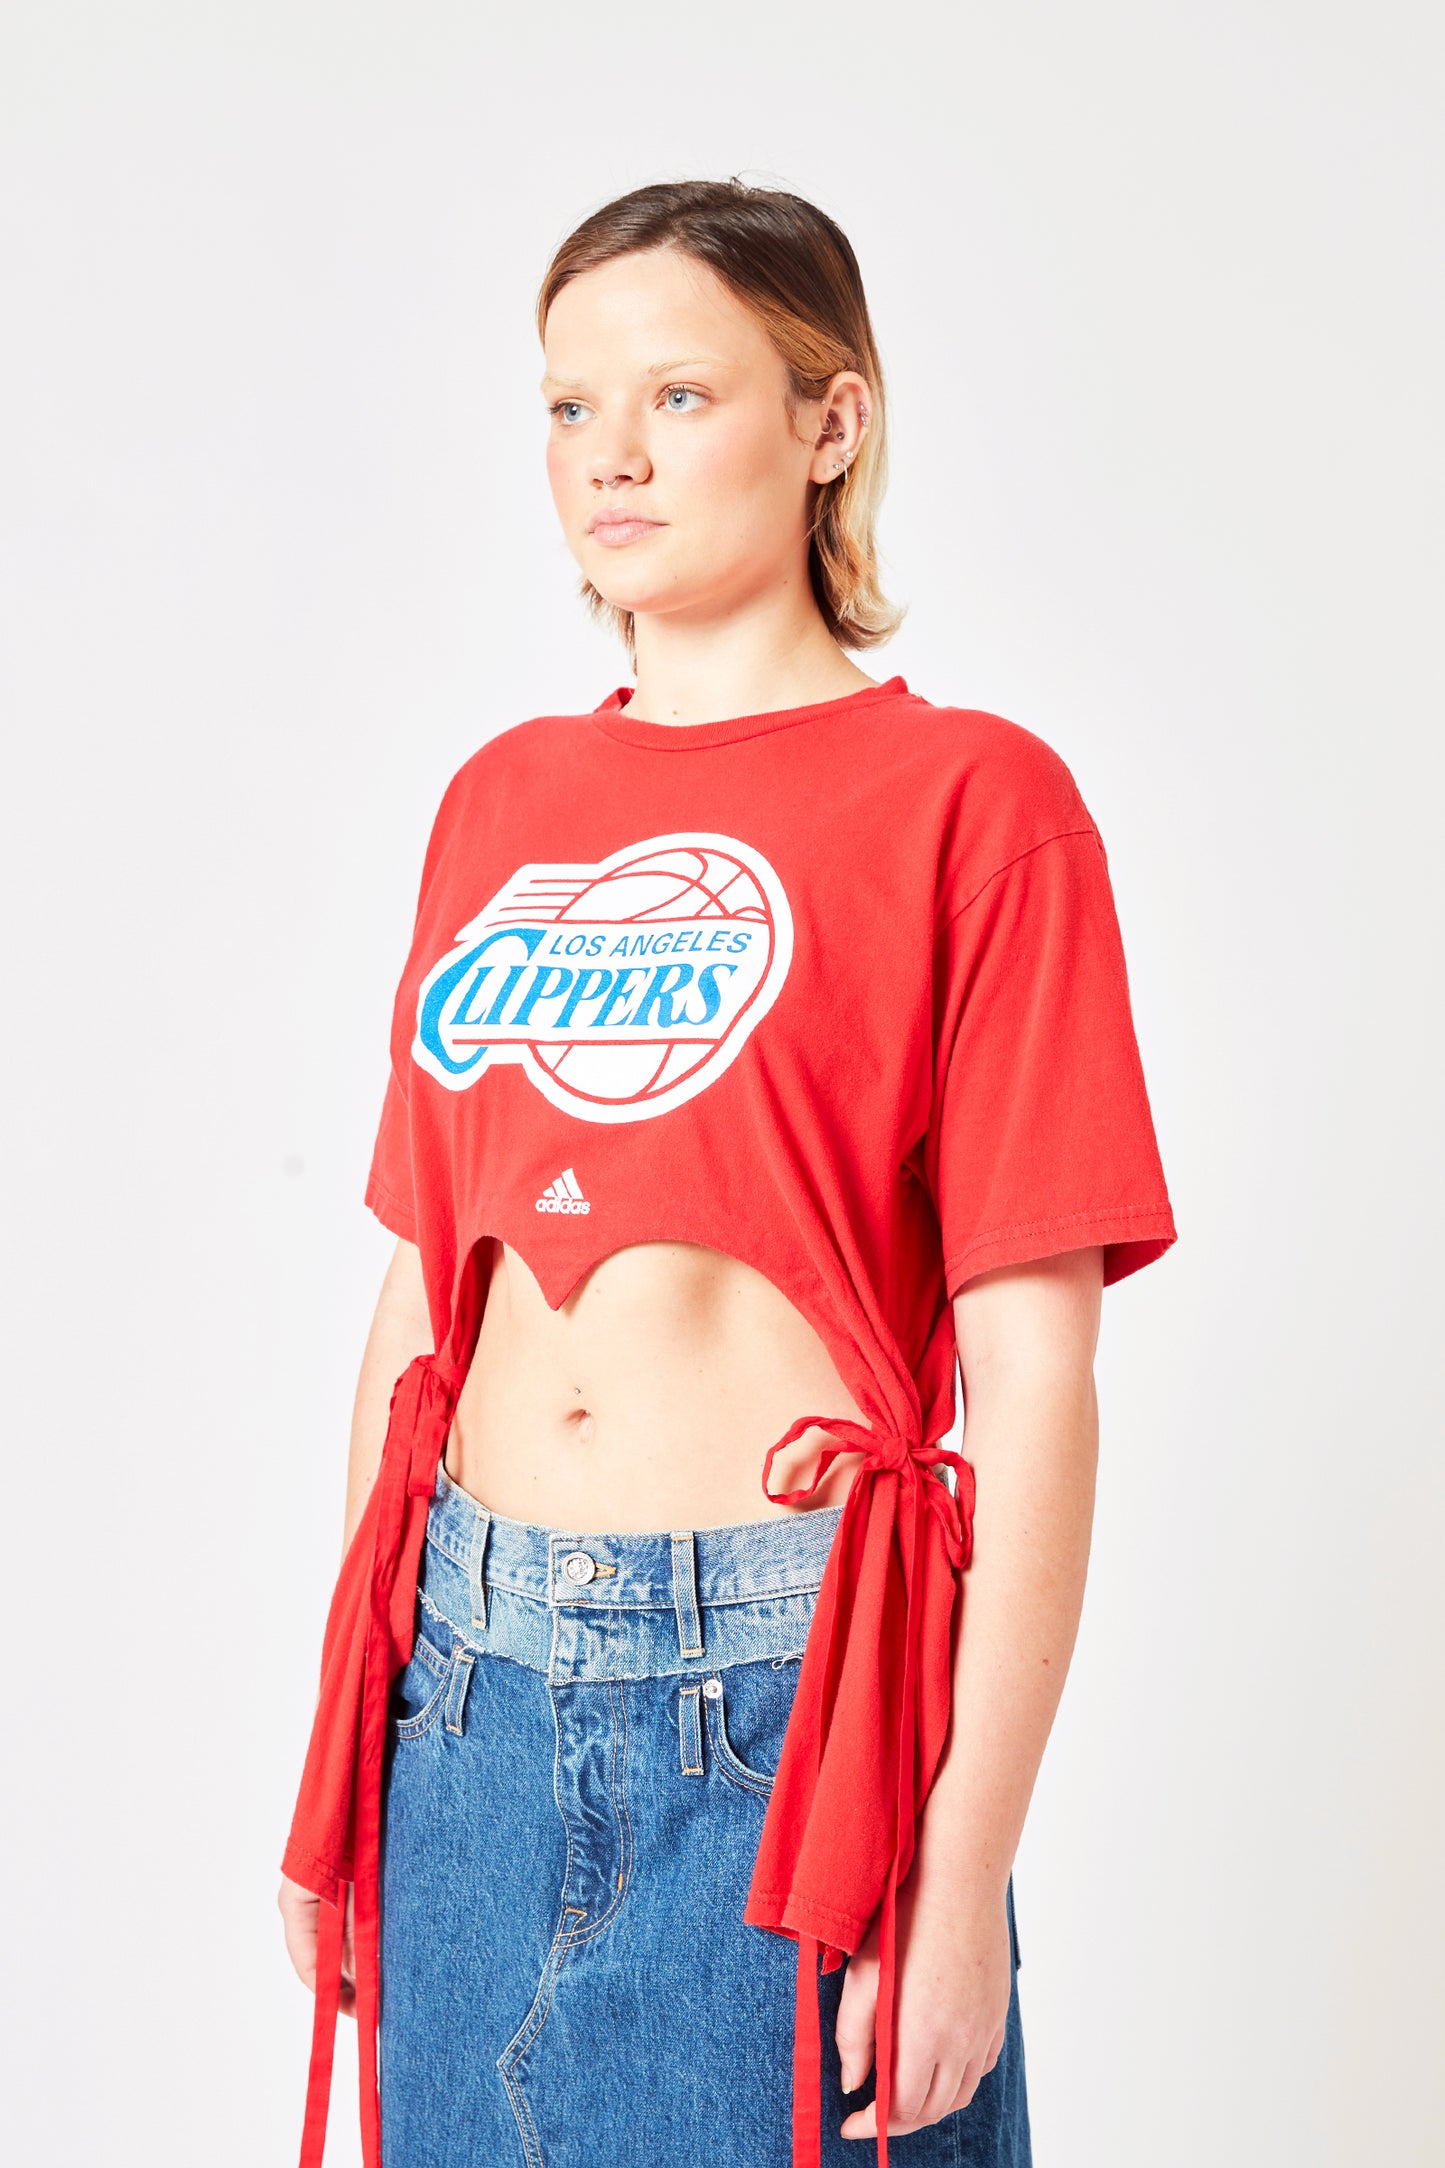 Heart Cut Out Tee - Clippers